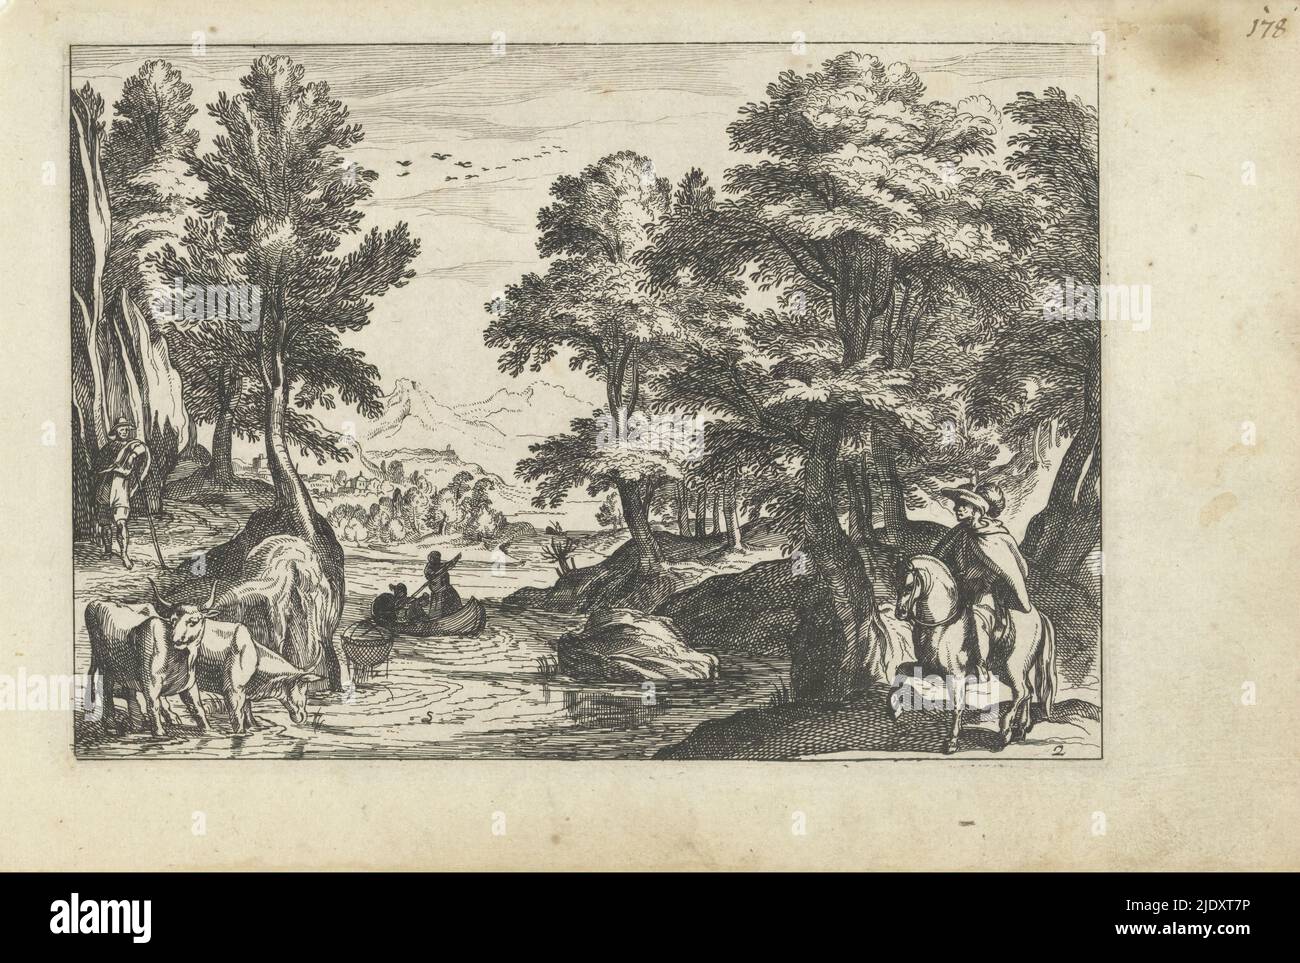 Landscape with horseman, drinking cattle and a boat in a river., Landscapes with figures (series title), Forest landscape with a horseman, drinking cattle and a fishing boat in a river. Mountains are visible in the background., print maker: anonymous, after print by: Antonio Tempesta, publisher: Claes Jansz. Visscher (II), print maker: Netherlands, publisher: Amsterdam, 1612 - 1652, paper, engraving, height 127 mm × width 181 mm Stock Photo